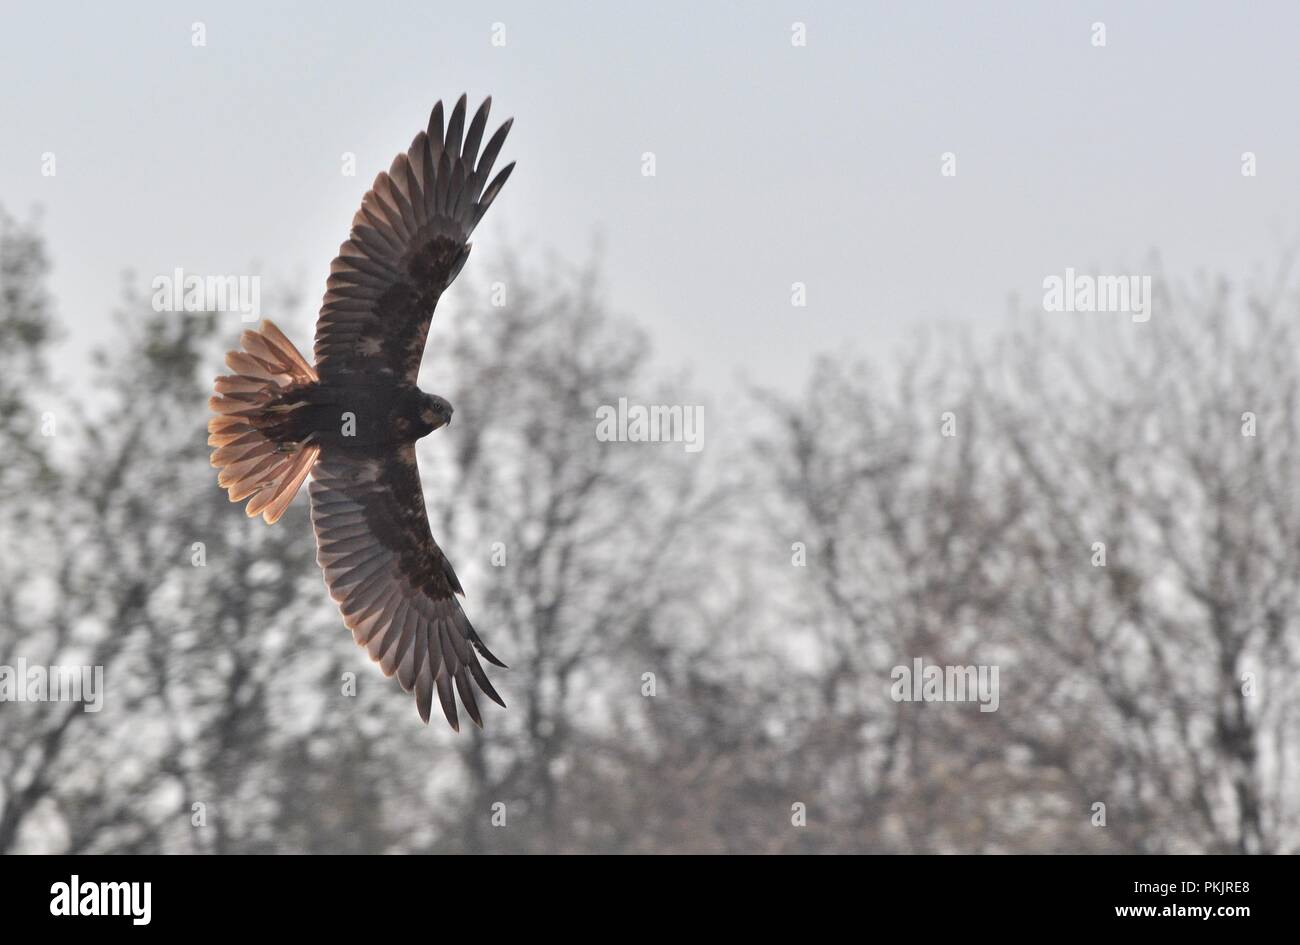 Red-tailed hawk (Buteo jamaicensis) flying Stock Photo